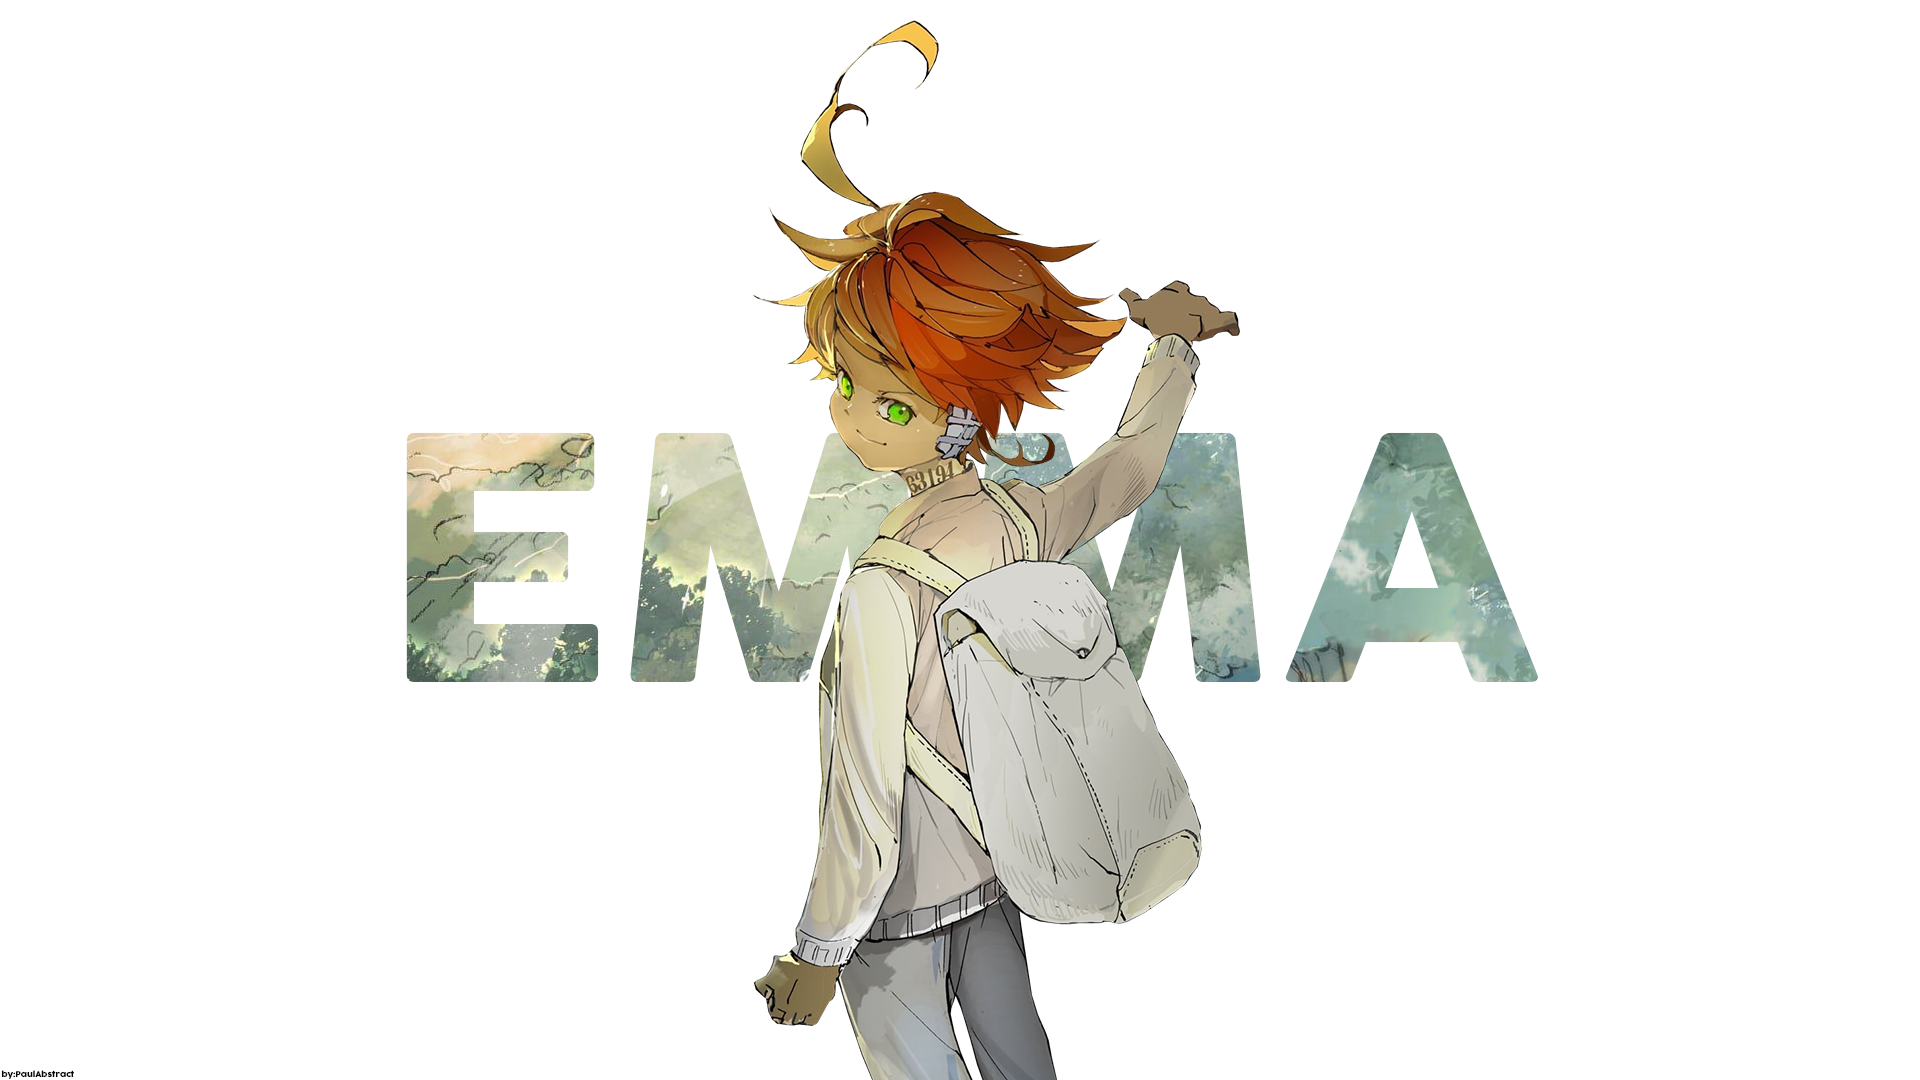 The Promised Neverland HD Wallpaper Background Image